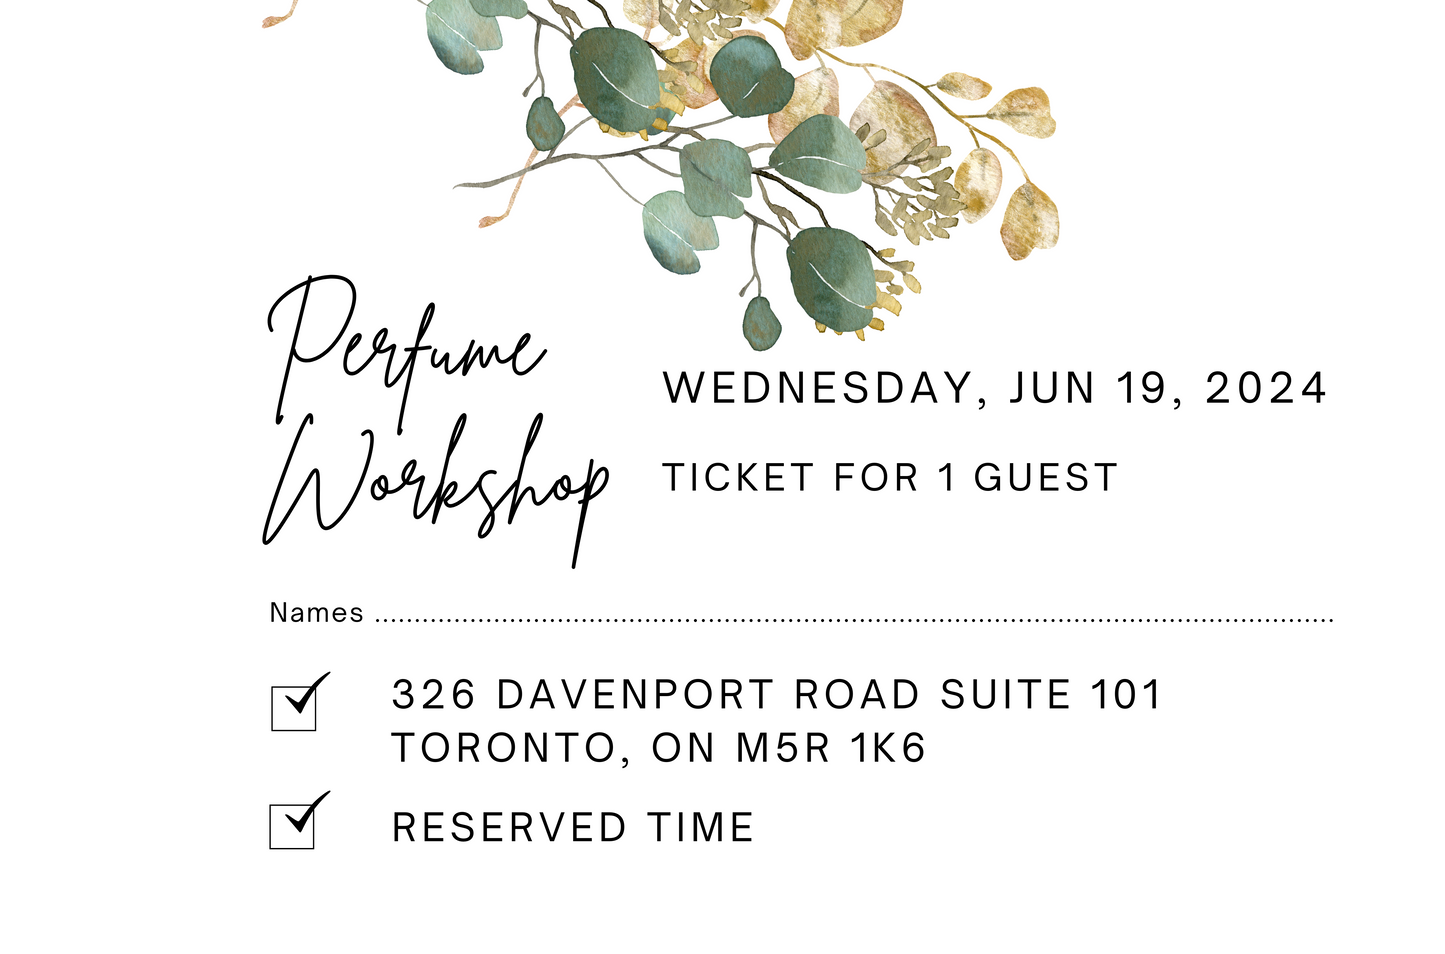 June 19th, 2024 Perfume/Cologne Workshop Session For 1 Guest